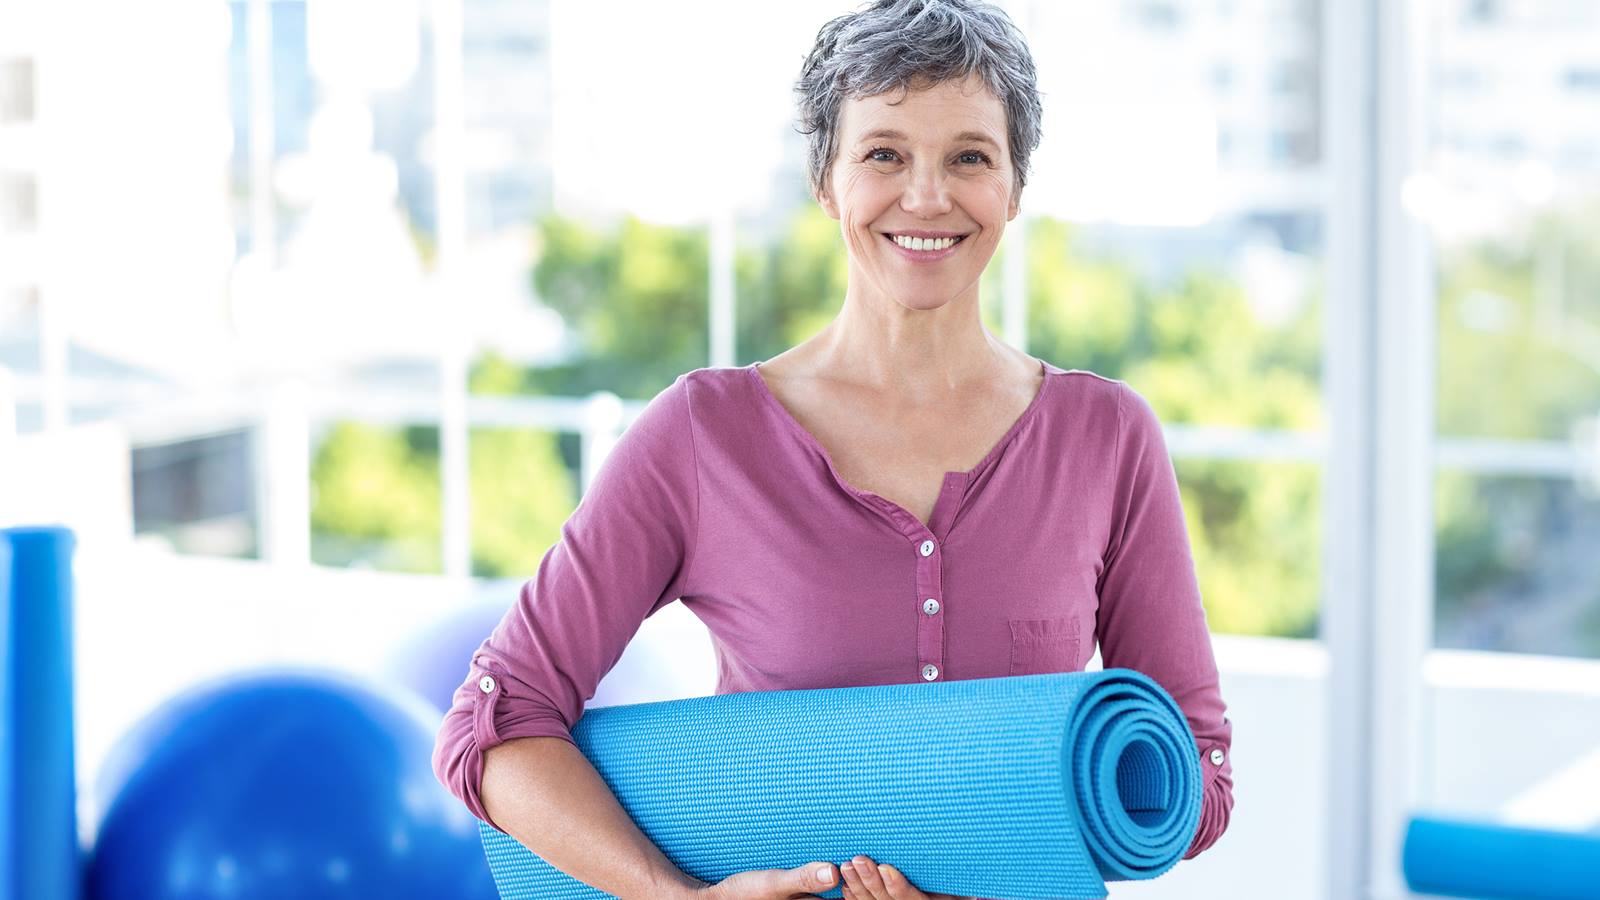 Can I Do Yoga If I Have Osteoporosis?